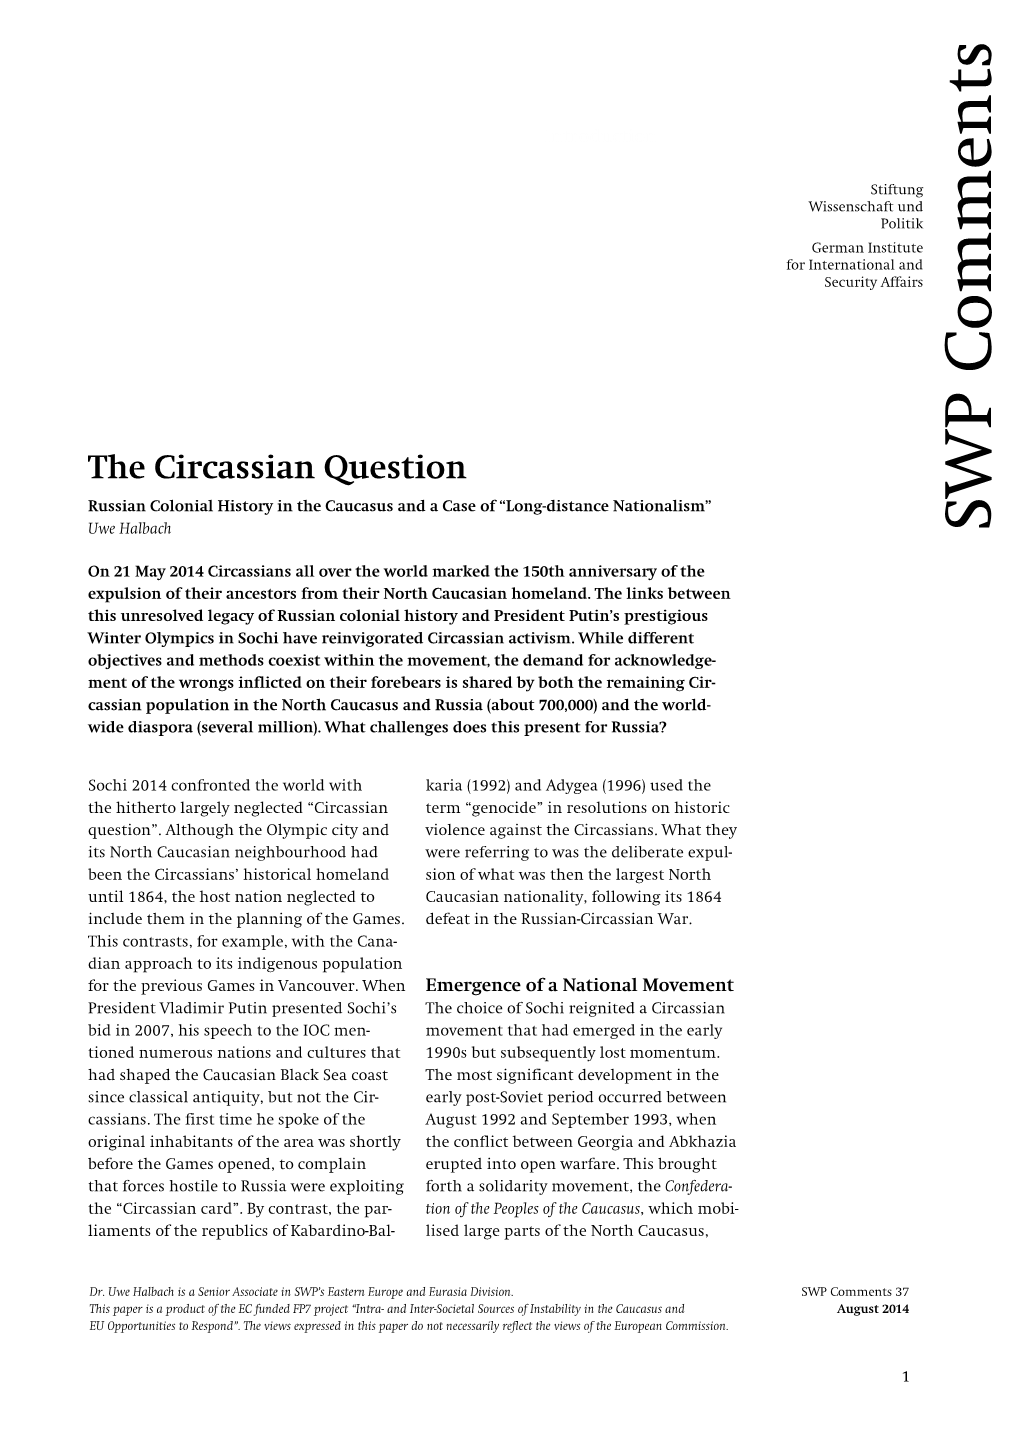 The Circassian Question. Russian Colonial History in the Caucasus and a Case Of